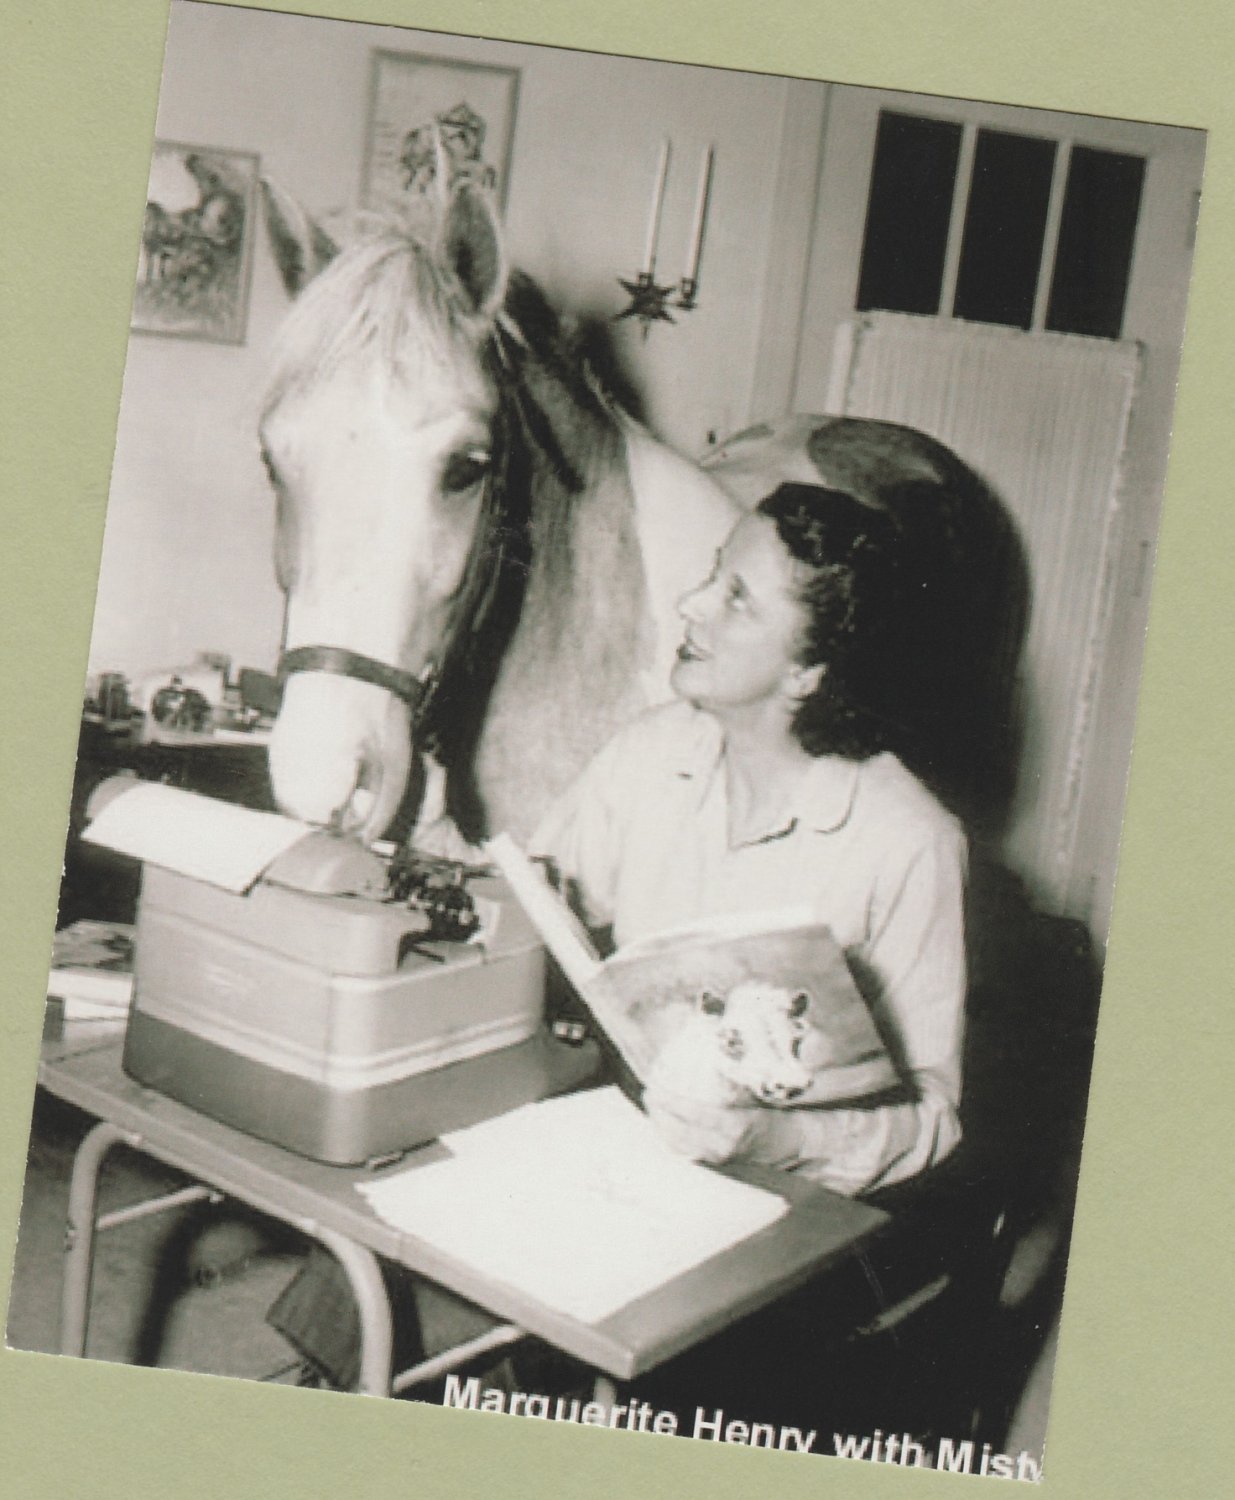 misty of chincoteague by marguerite henry